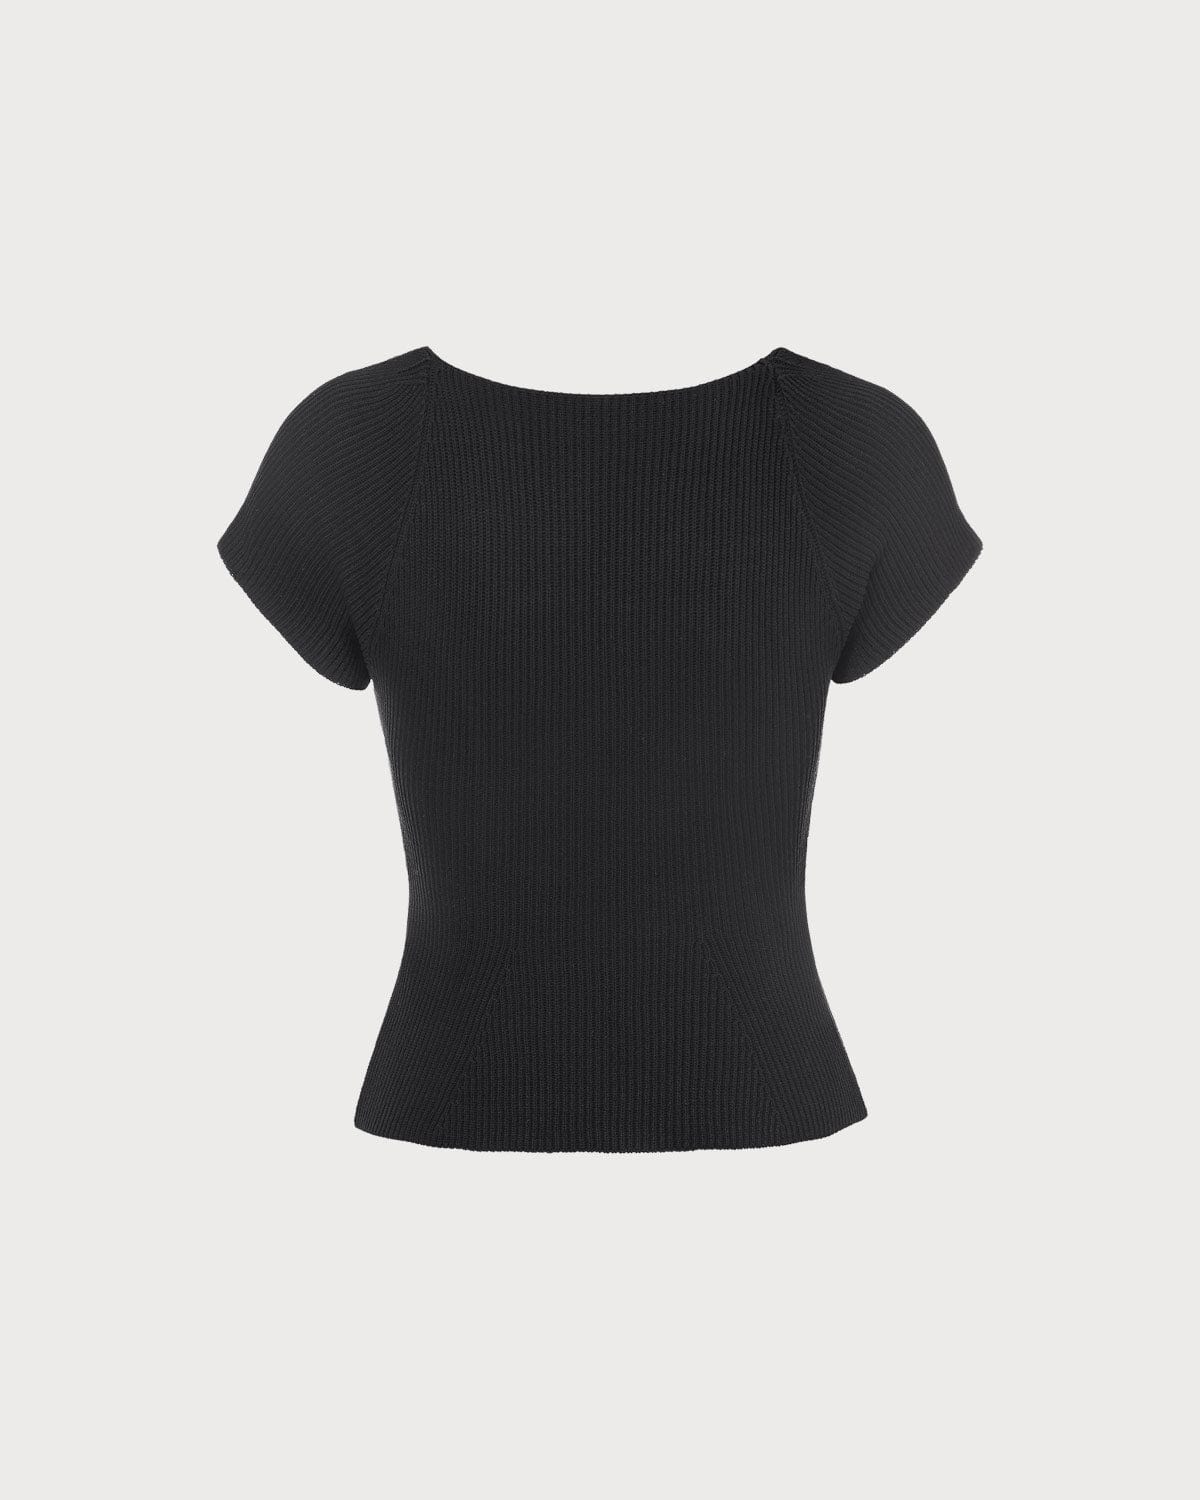 The Black Square Neck Short Sleeve Knit Top